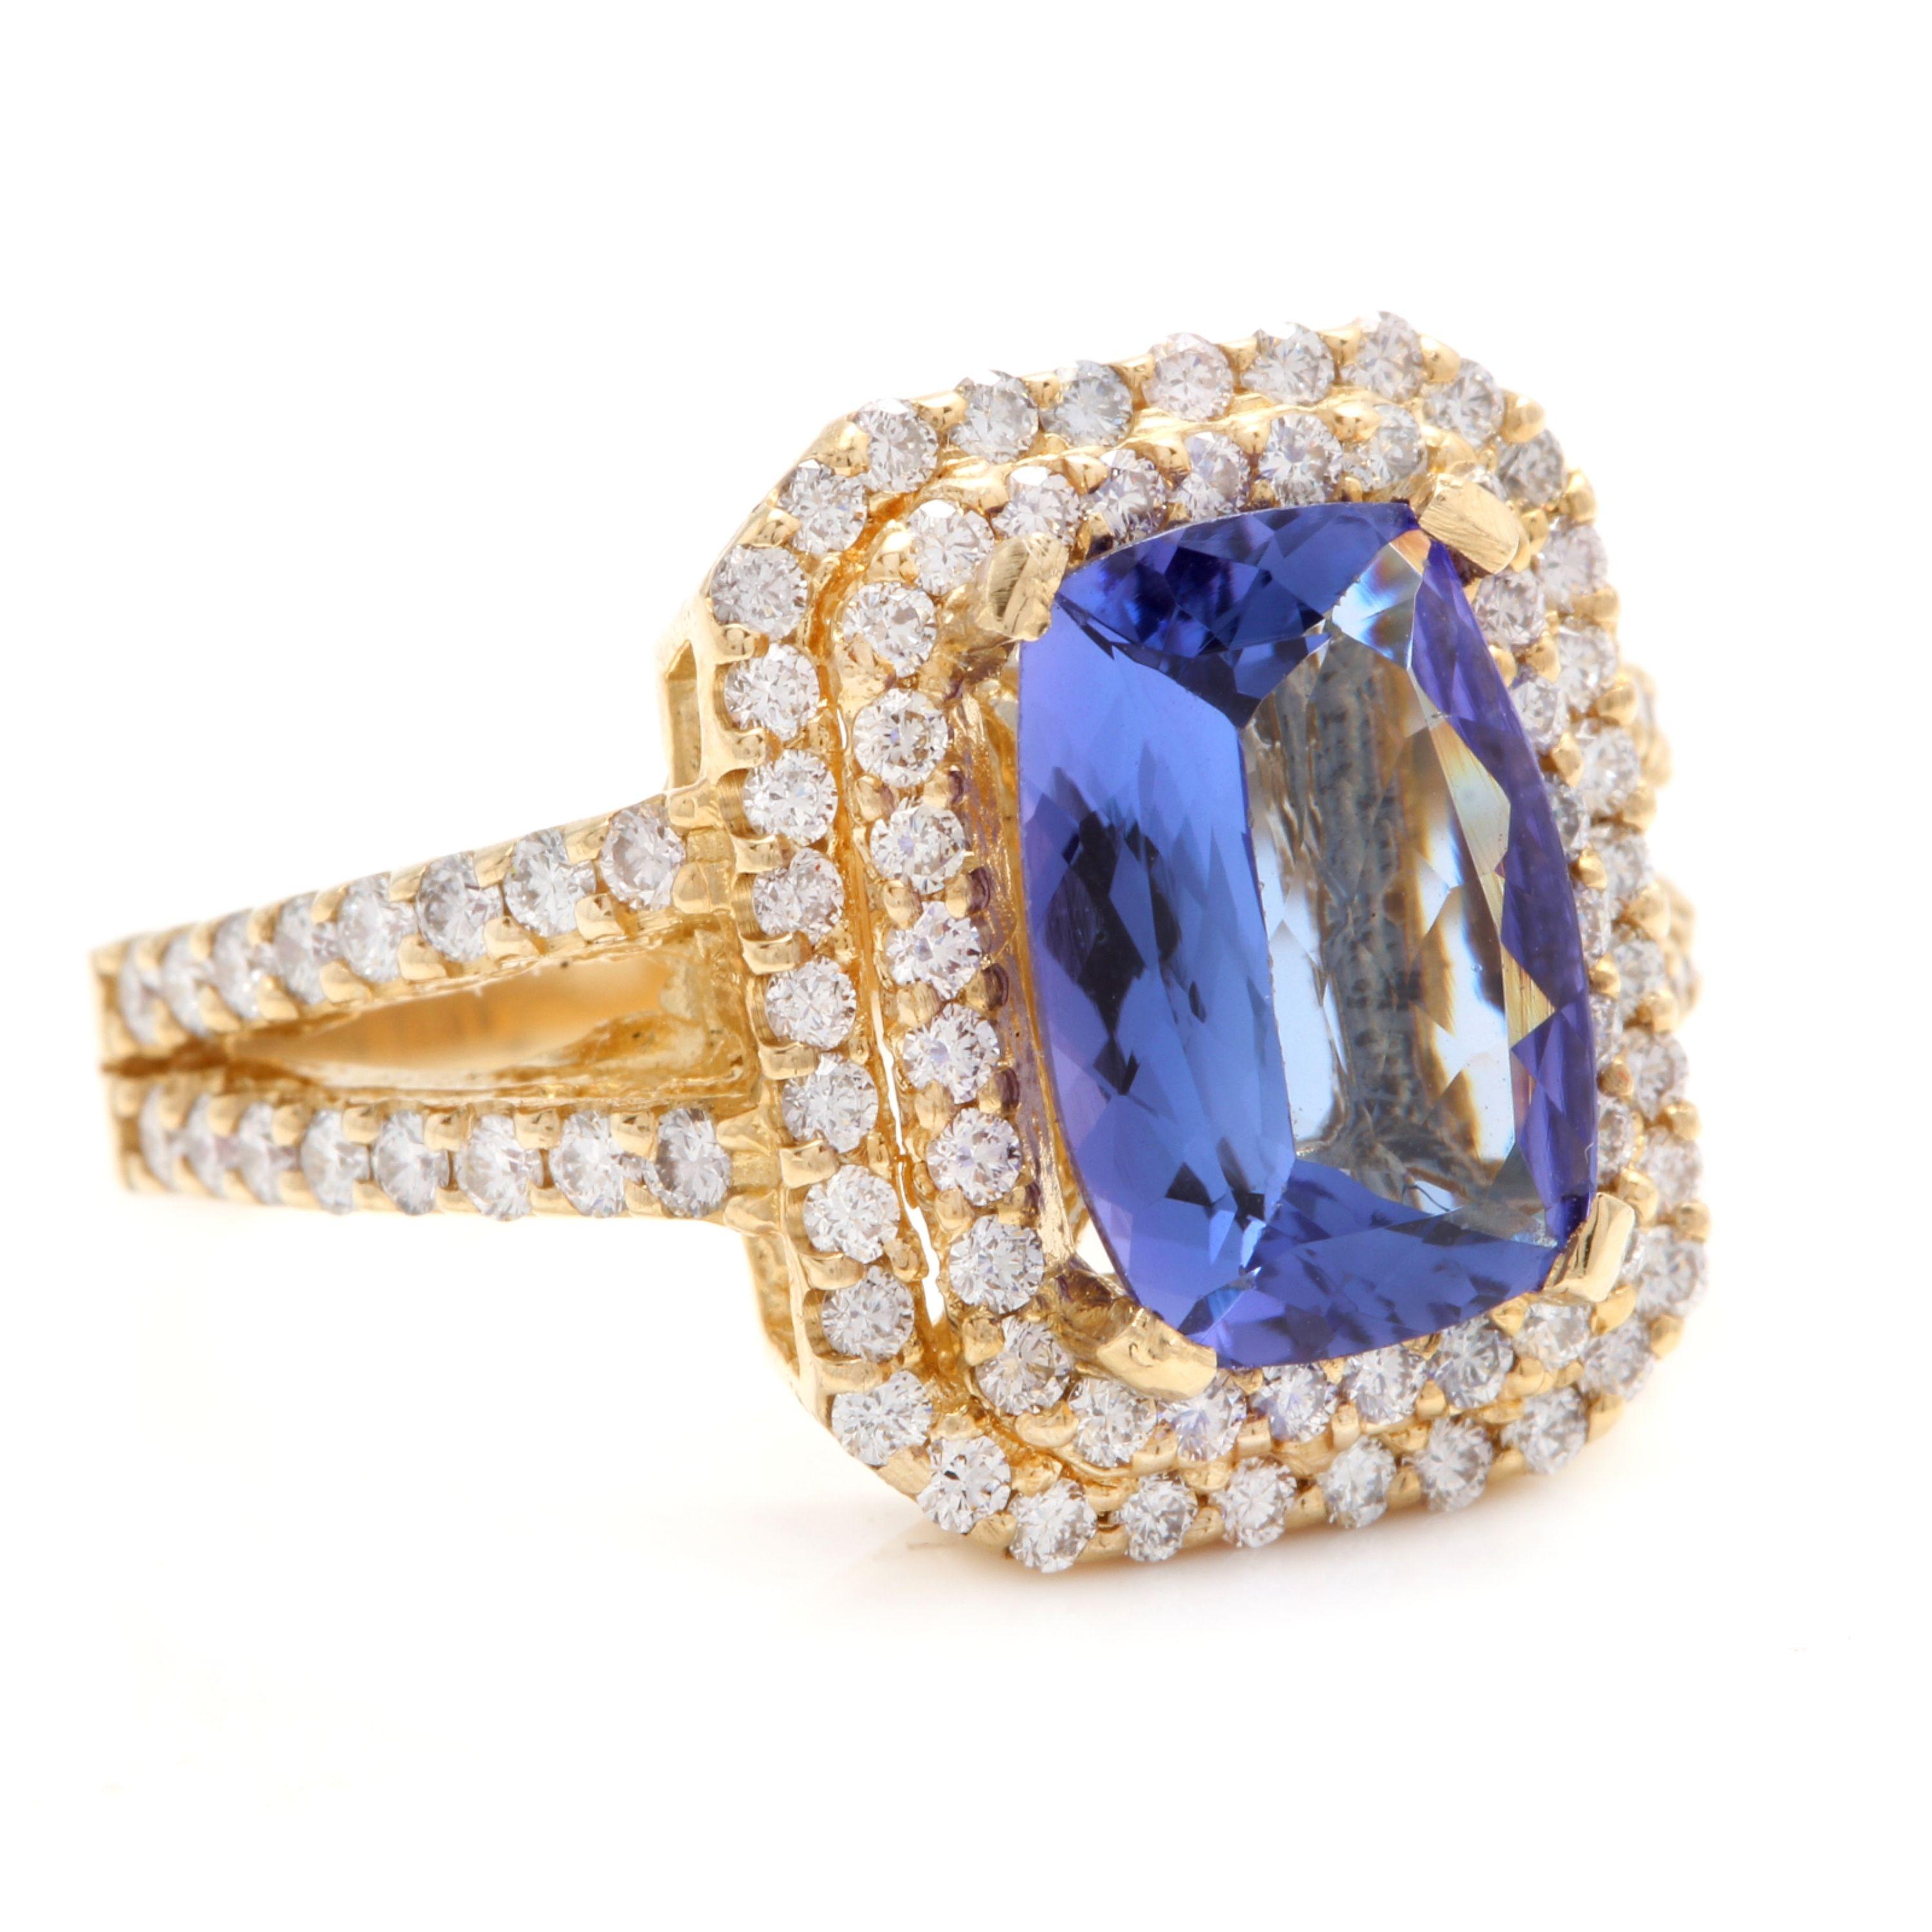 5.50 Carats Natural Very Nice Looking Tanzanite and Diamond 14K Solid Yellow Gold Ring

Total Natural Oval Cut Tanzanite Weight is: Approx. 4.30 Carats

Tanzanite Measures: Approx. 11.00 x 8.00mm

Tanzanite Treatment: Heat

Natural Round Diamonds